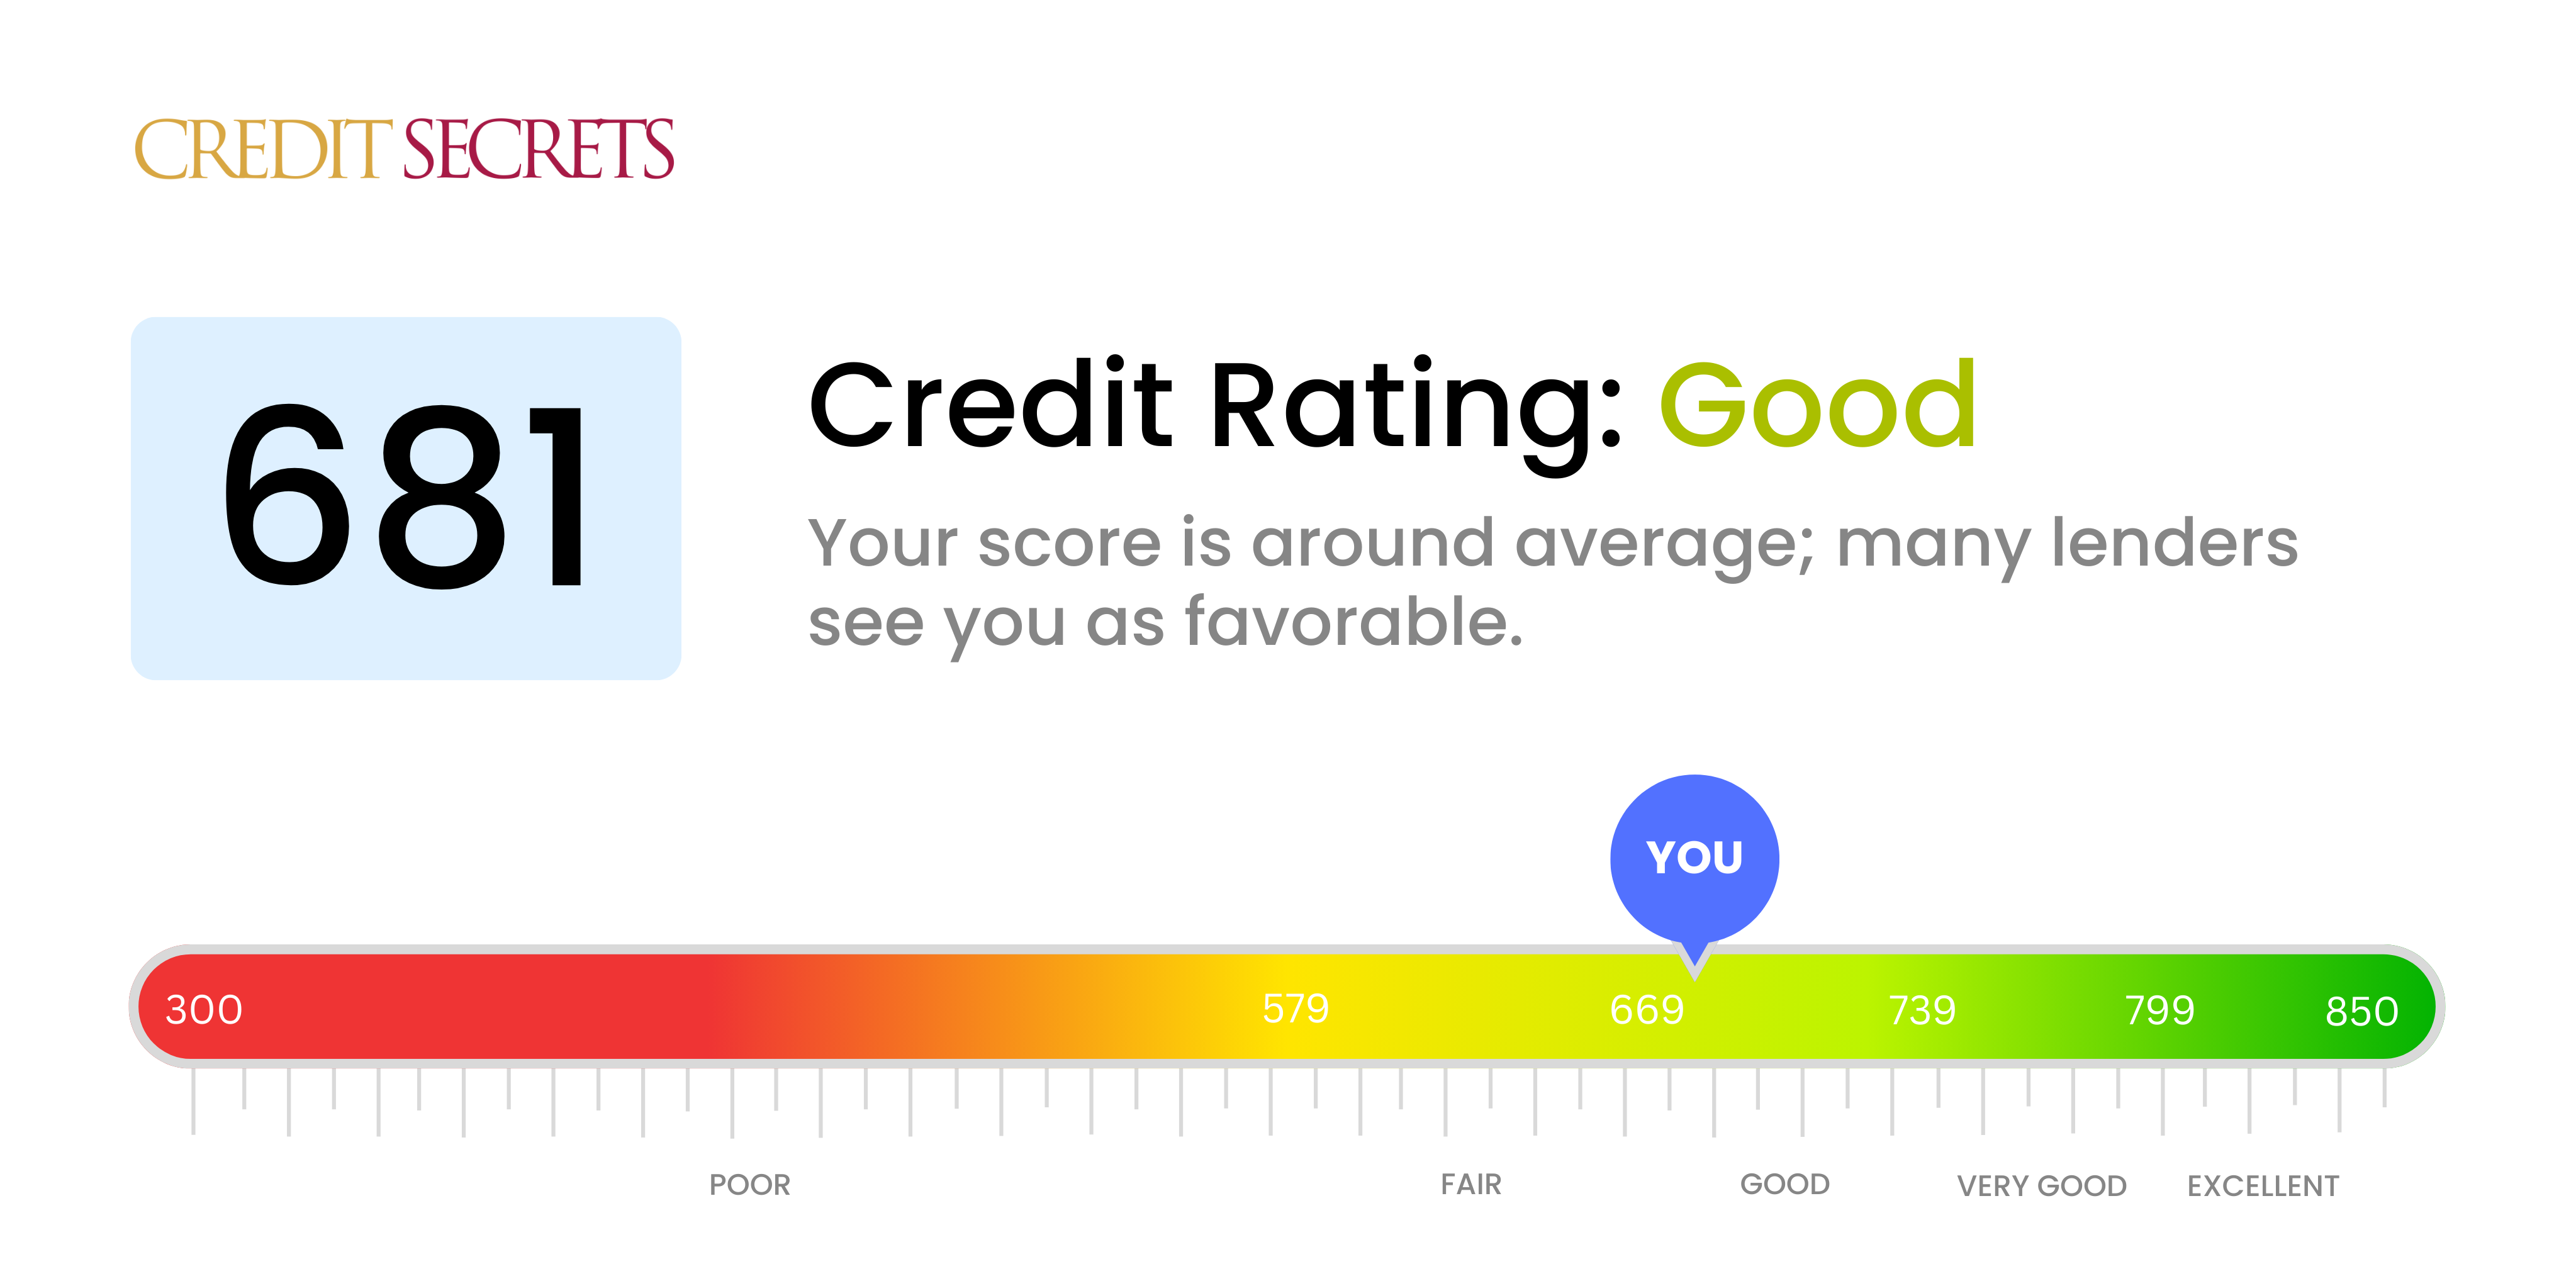 Is 681 a good credit score?